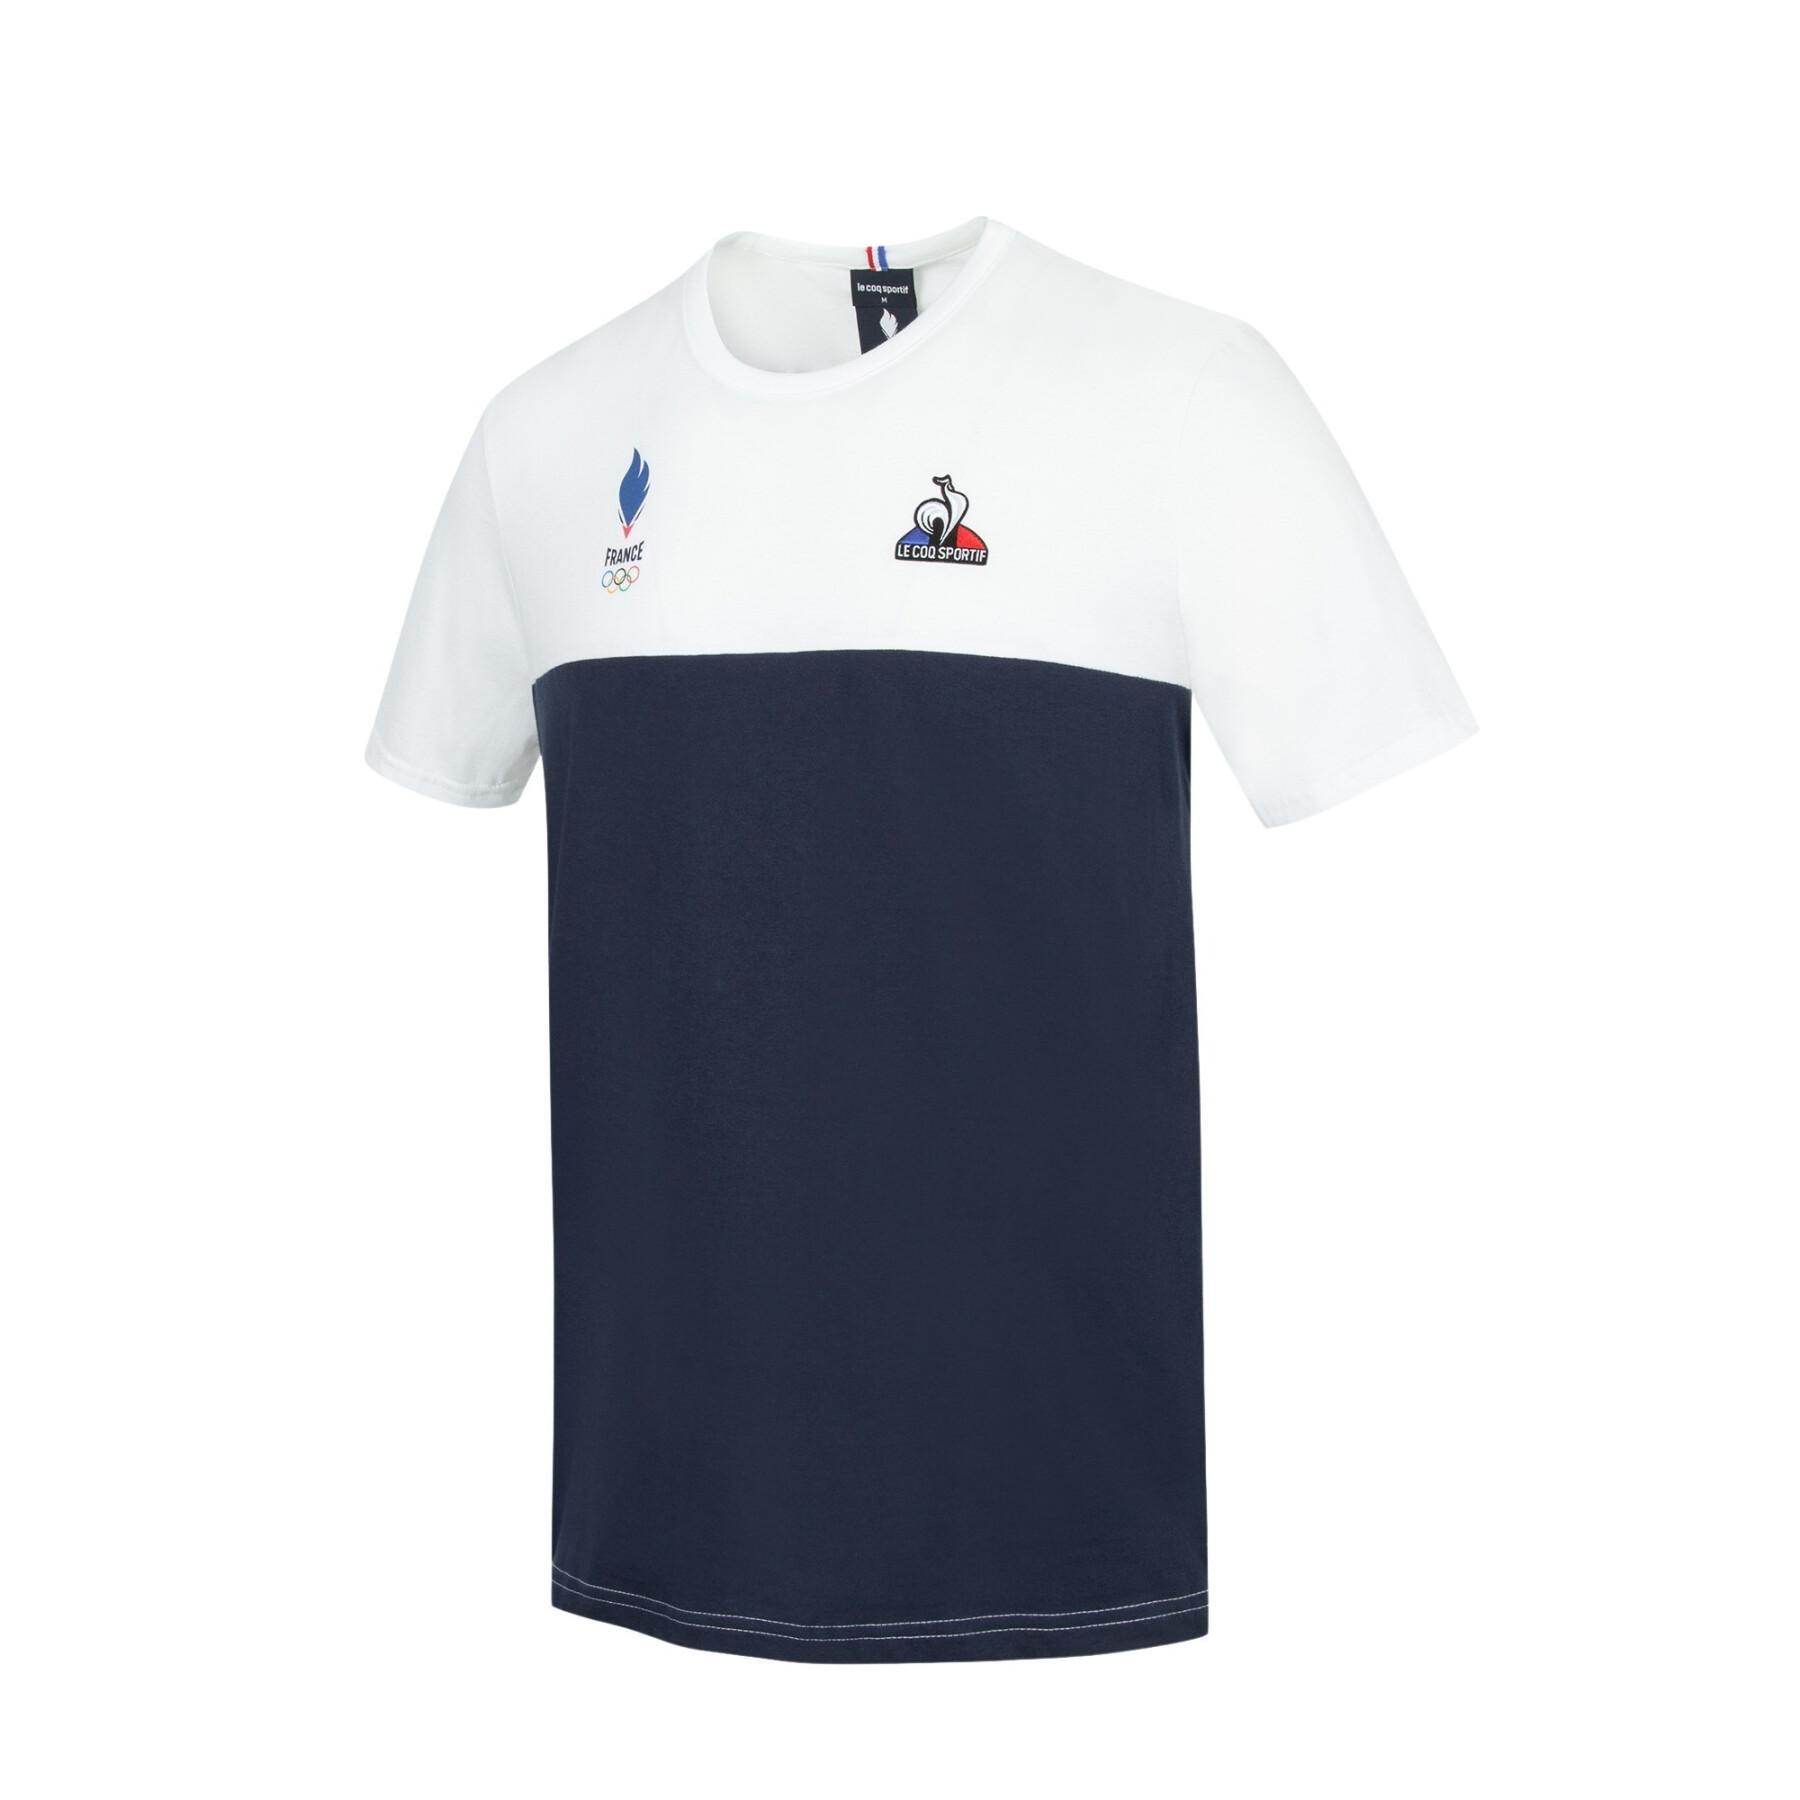 T-shirt France Olympique 2022 Comm N°2